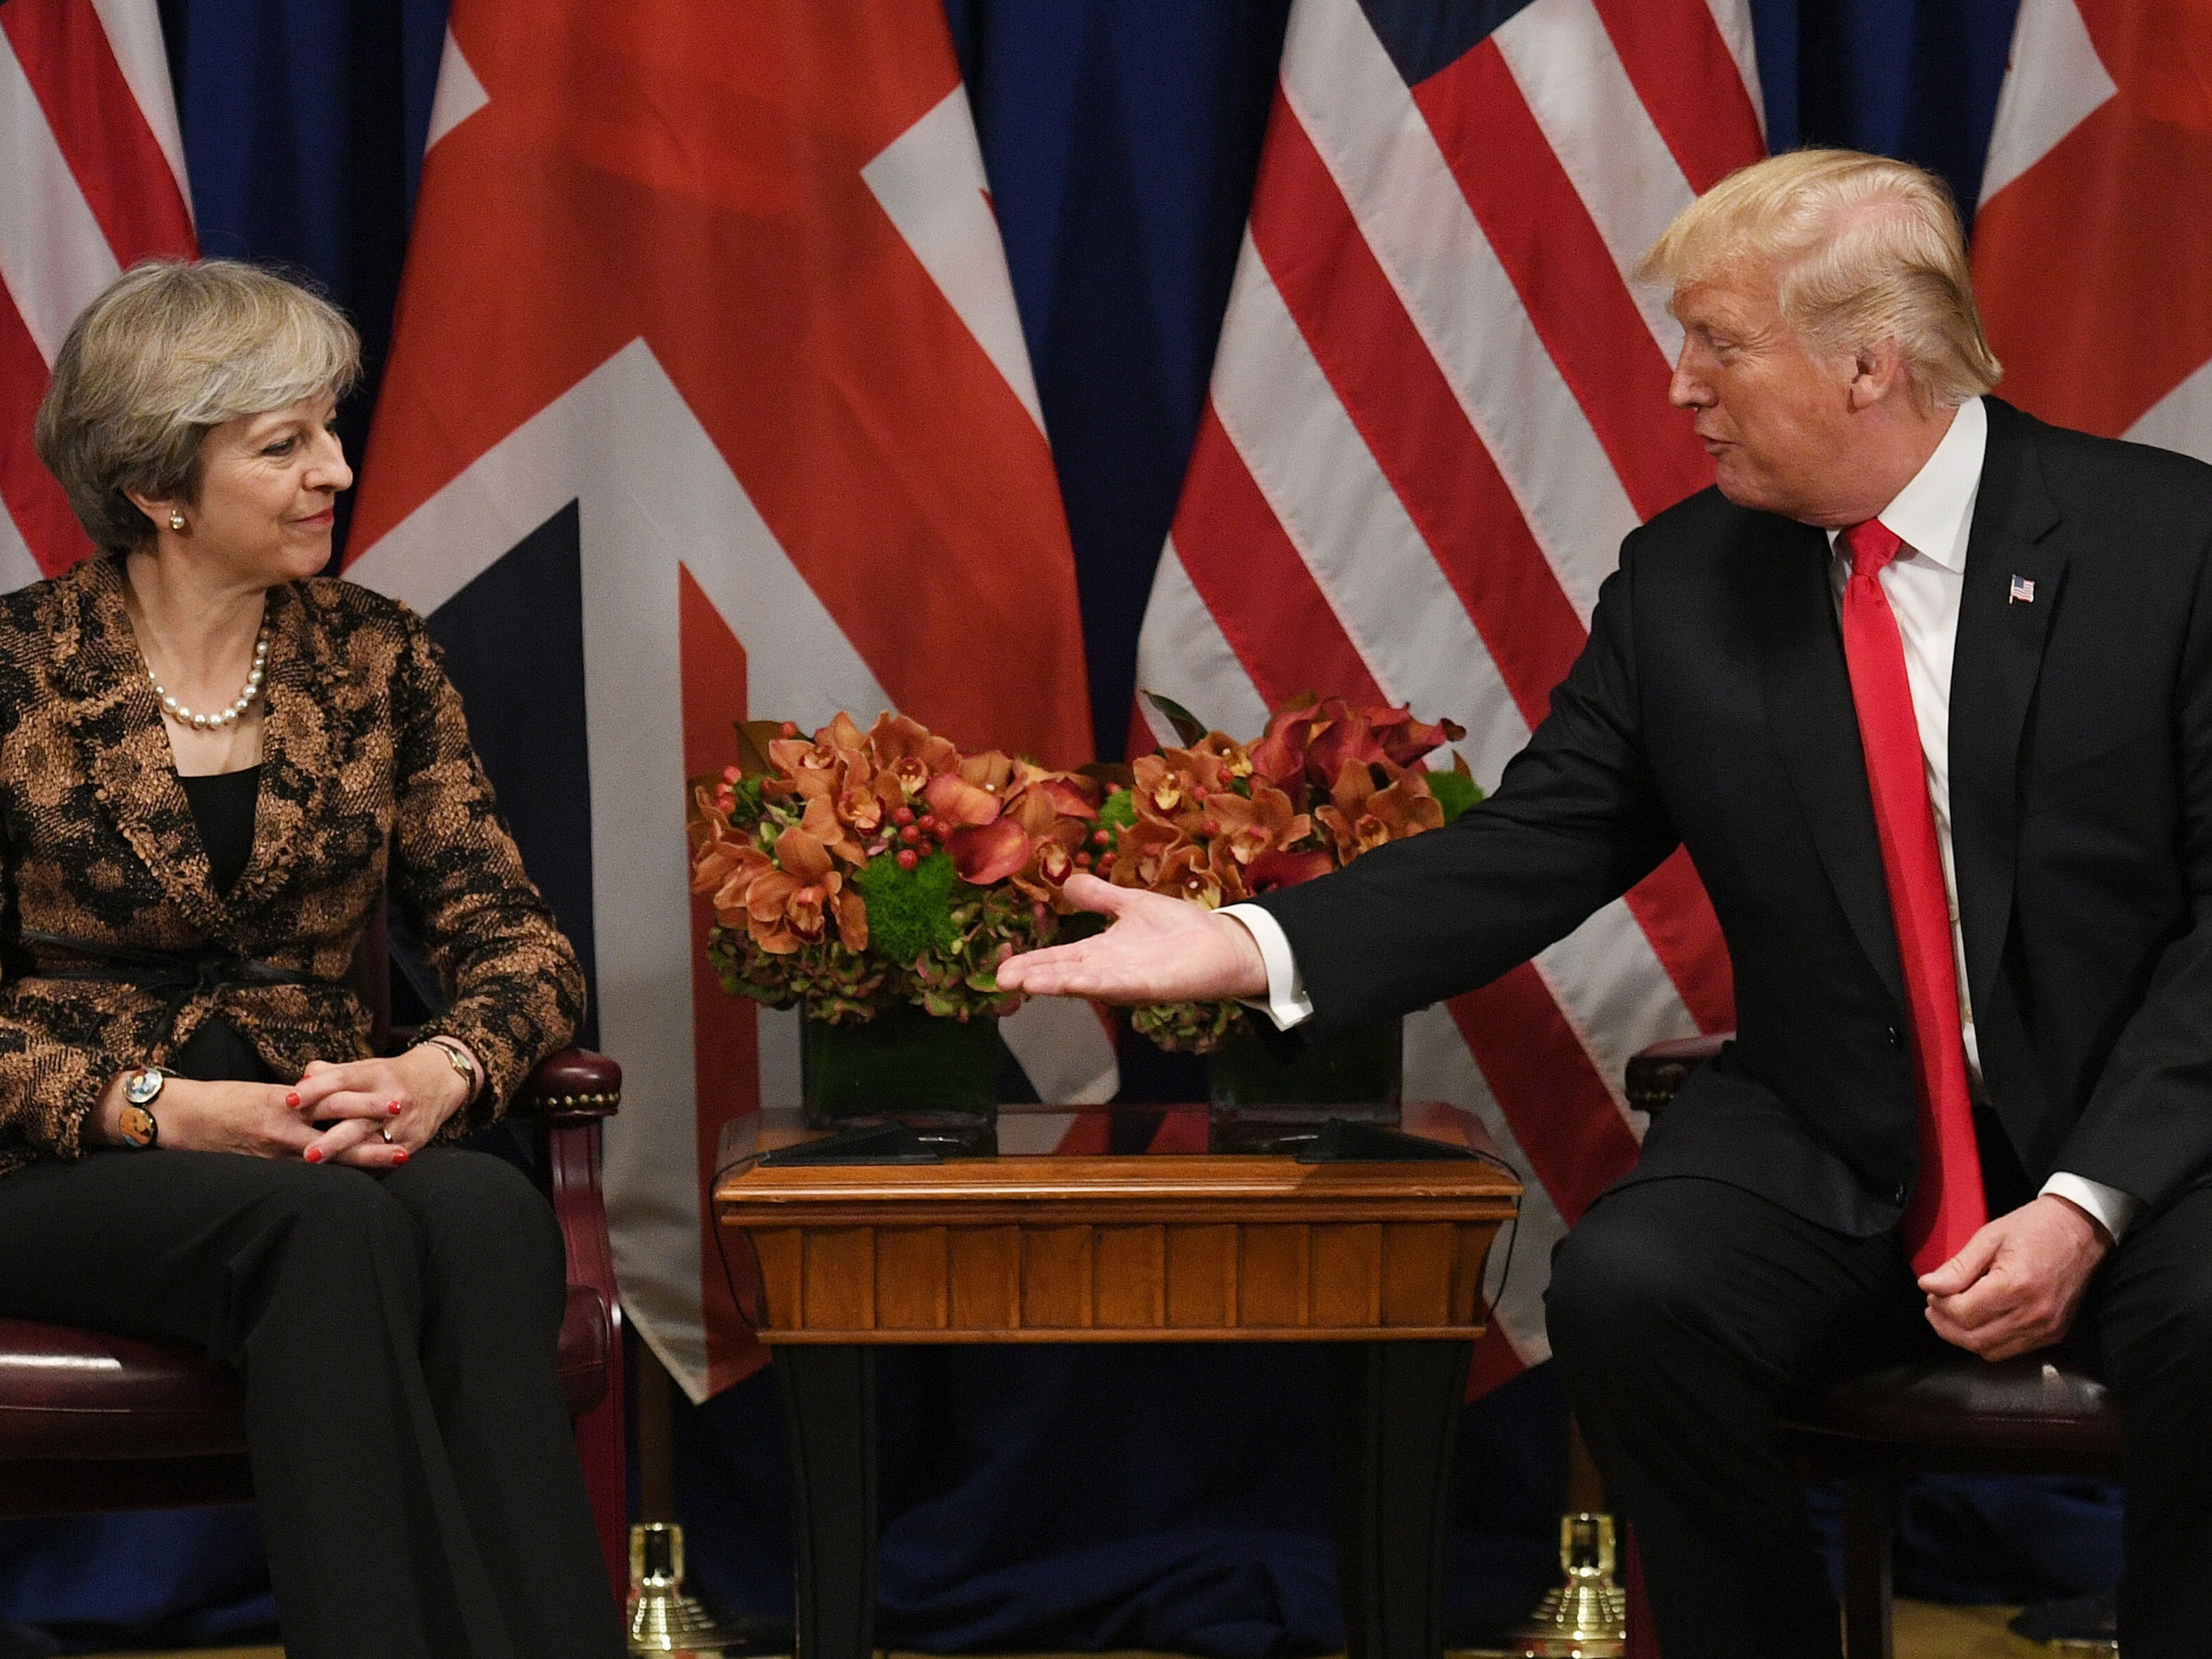 Theresa May and Donald Trump exchange cordialities during a meeting in New York (Stefan Rousseau/PA)